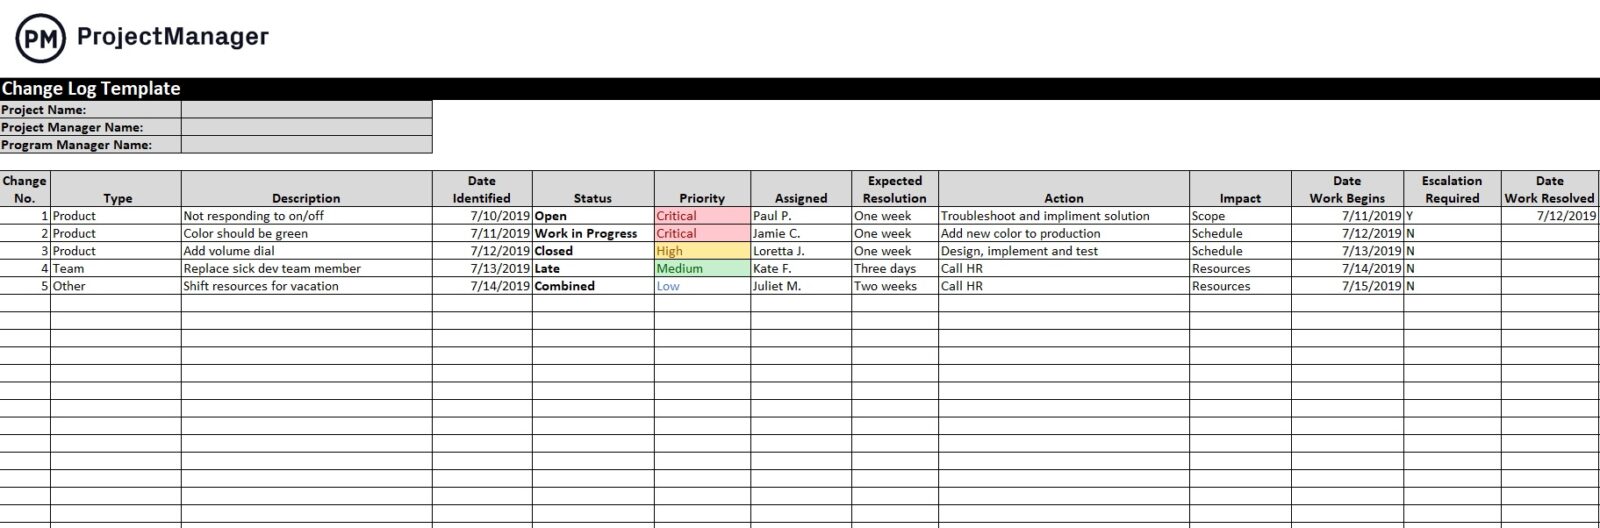 welfare war Perfervid excel tracker template free disinfect suddenly